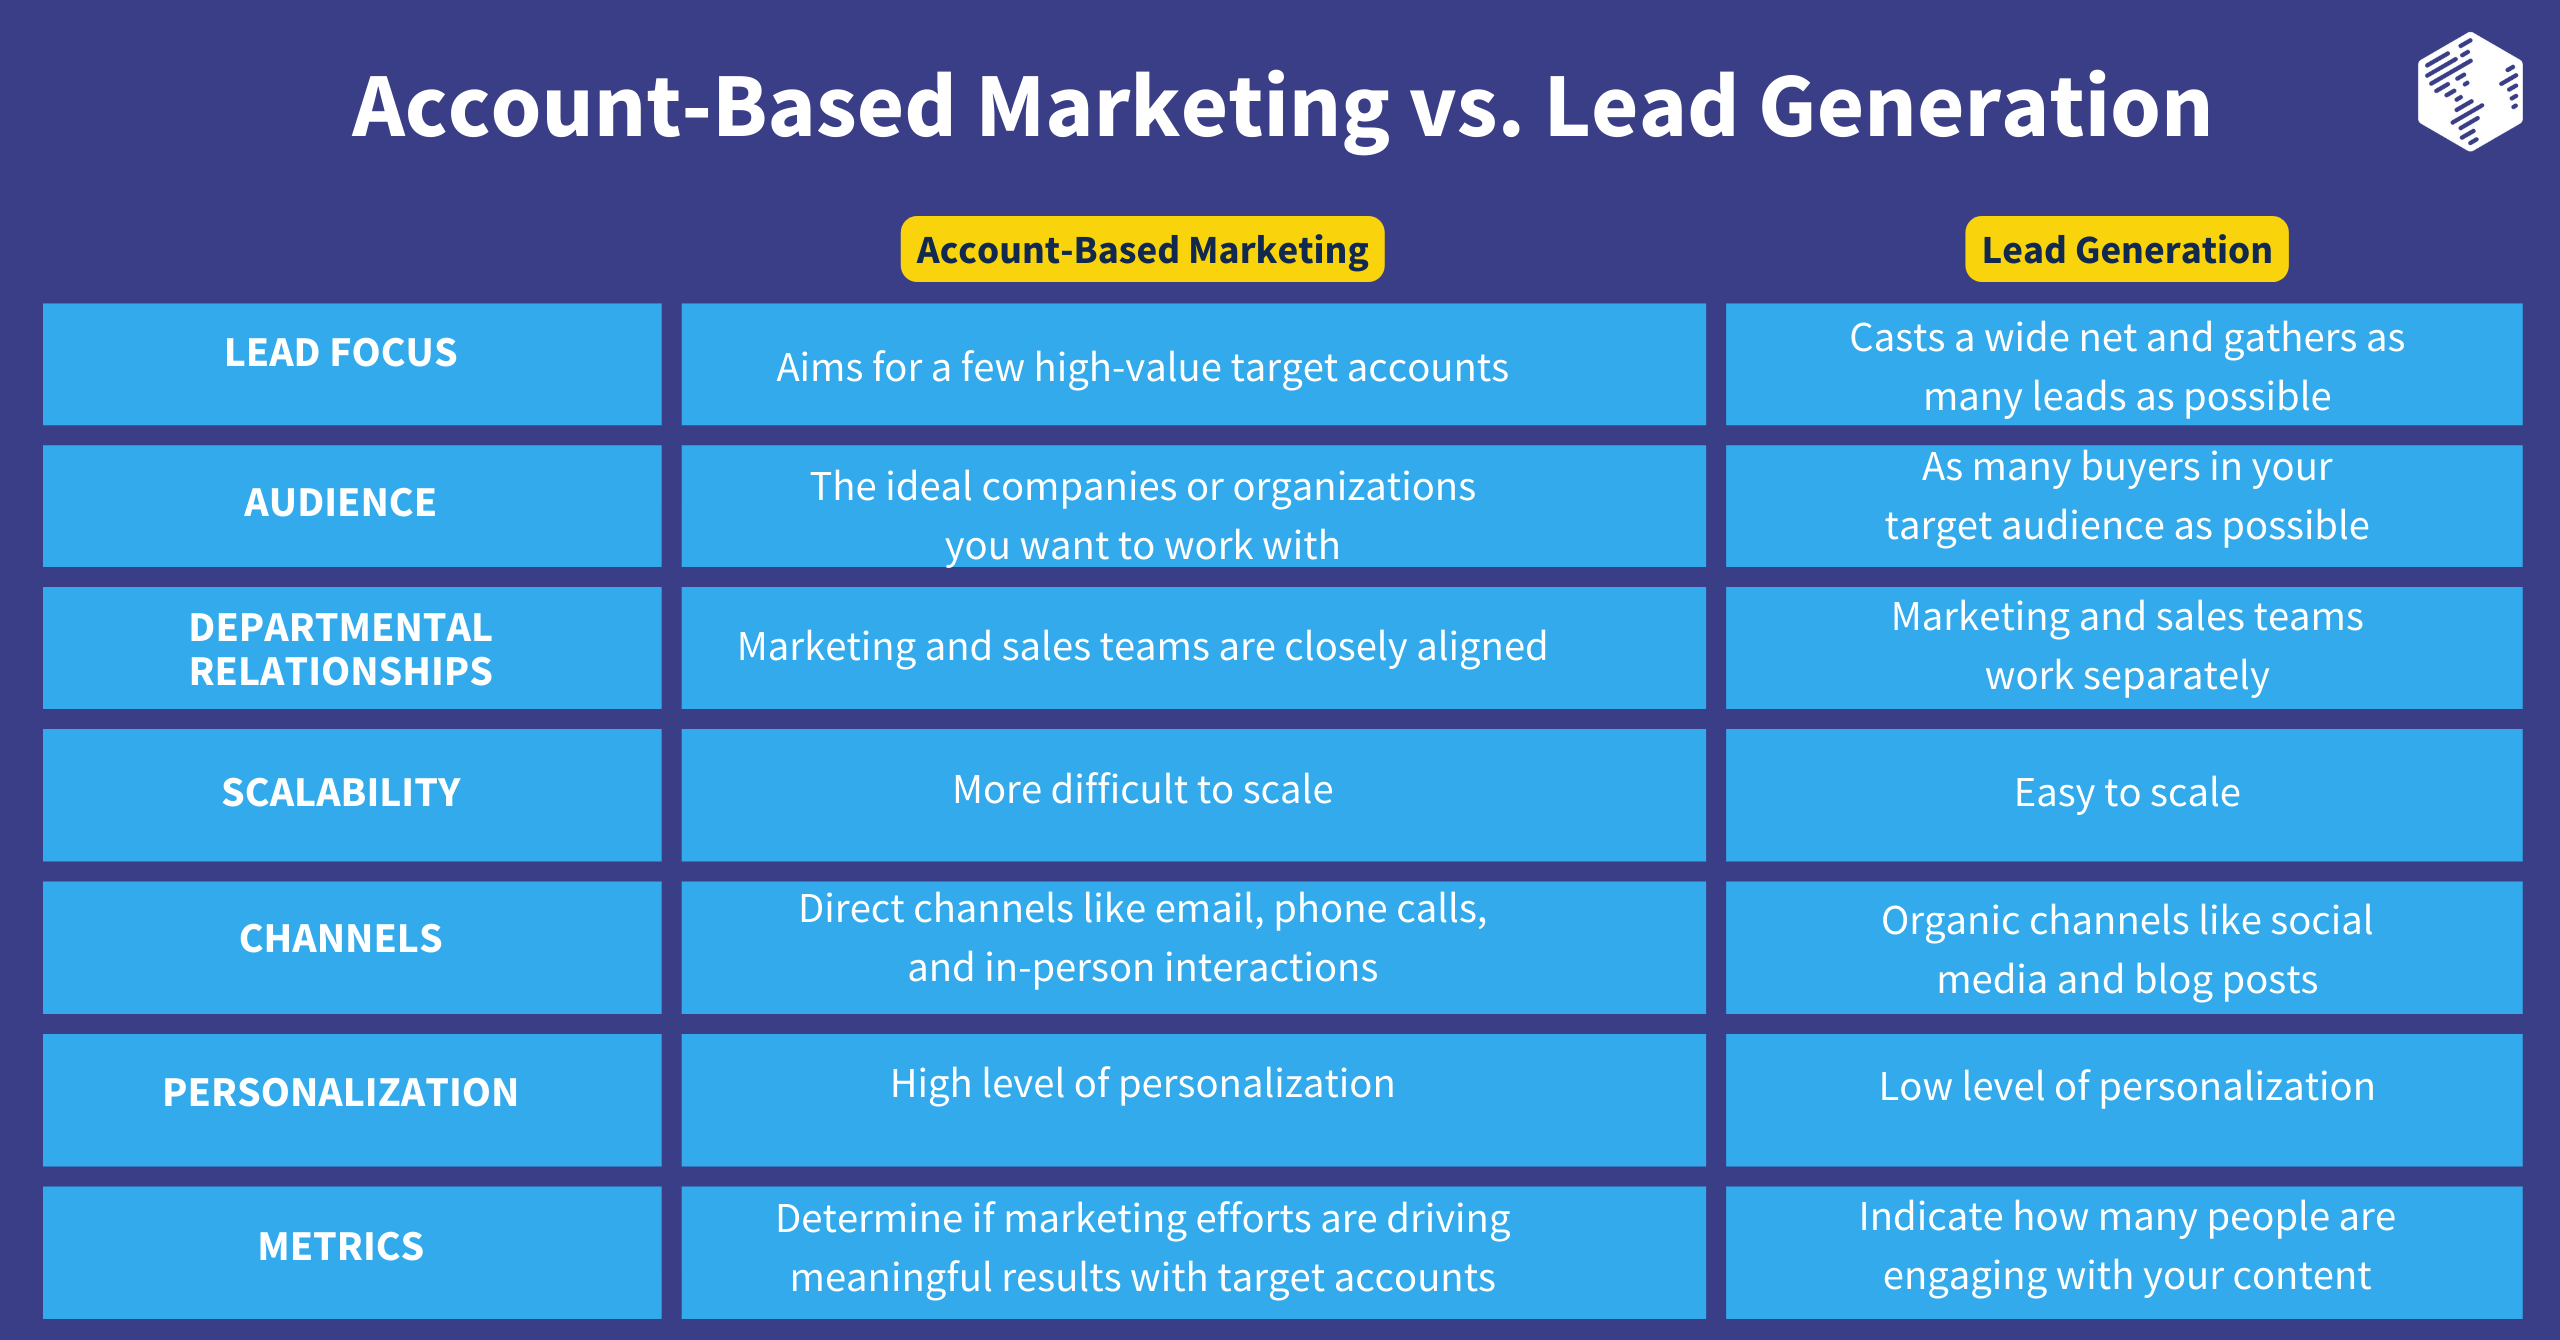 Difference Between Account-Based Marketing and Lead Generation